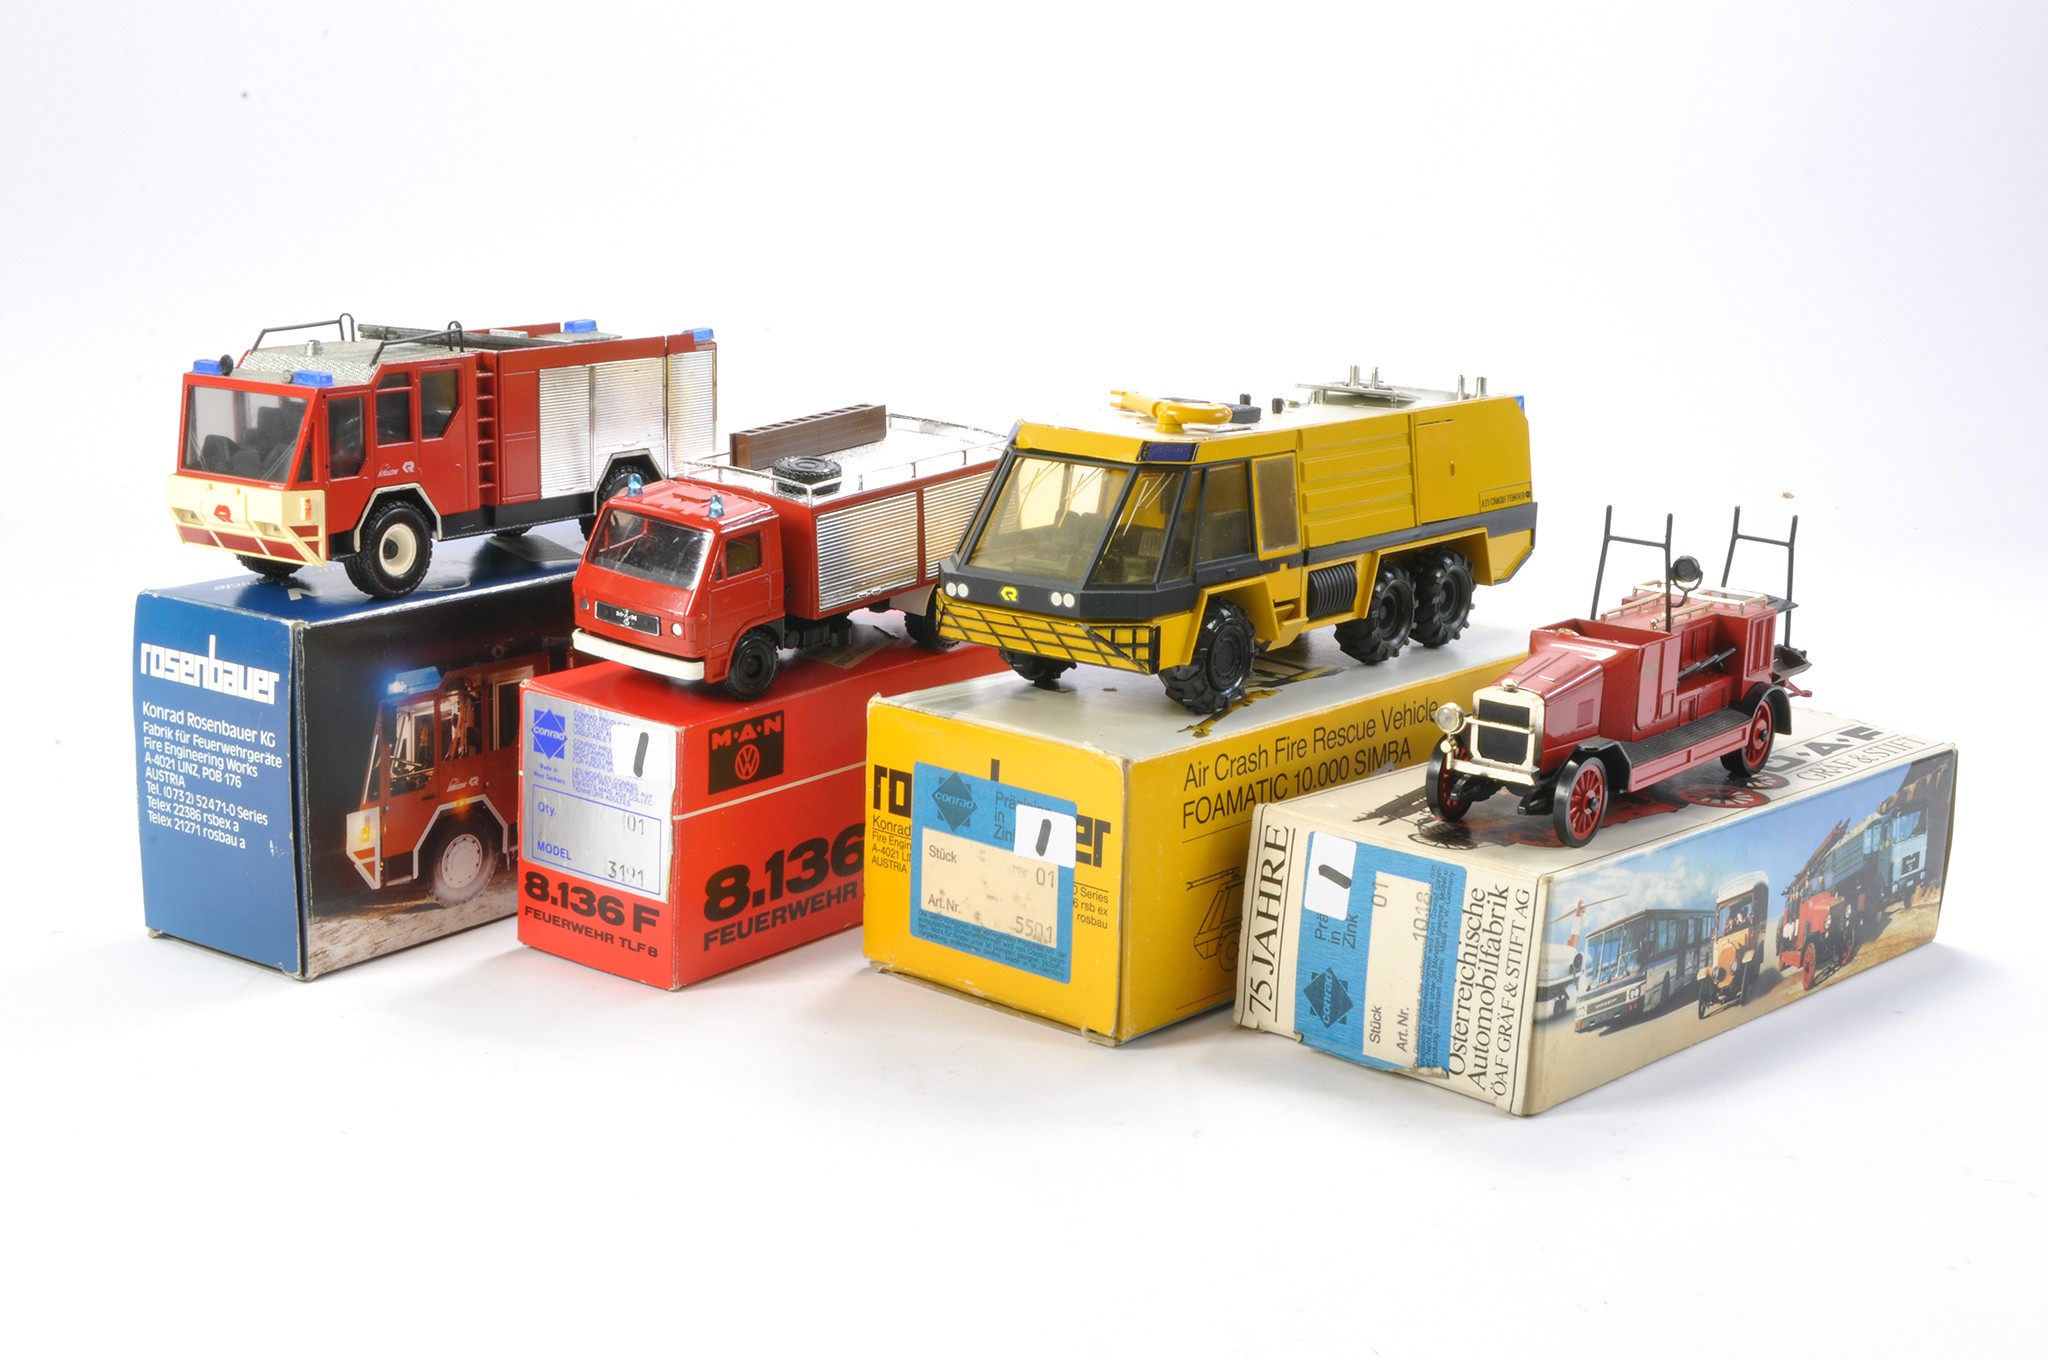 Fire and Rescue model issues comprising Conrad No. 1018 Graf and Stift Fire Truck, No. 5501 Air